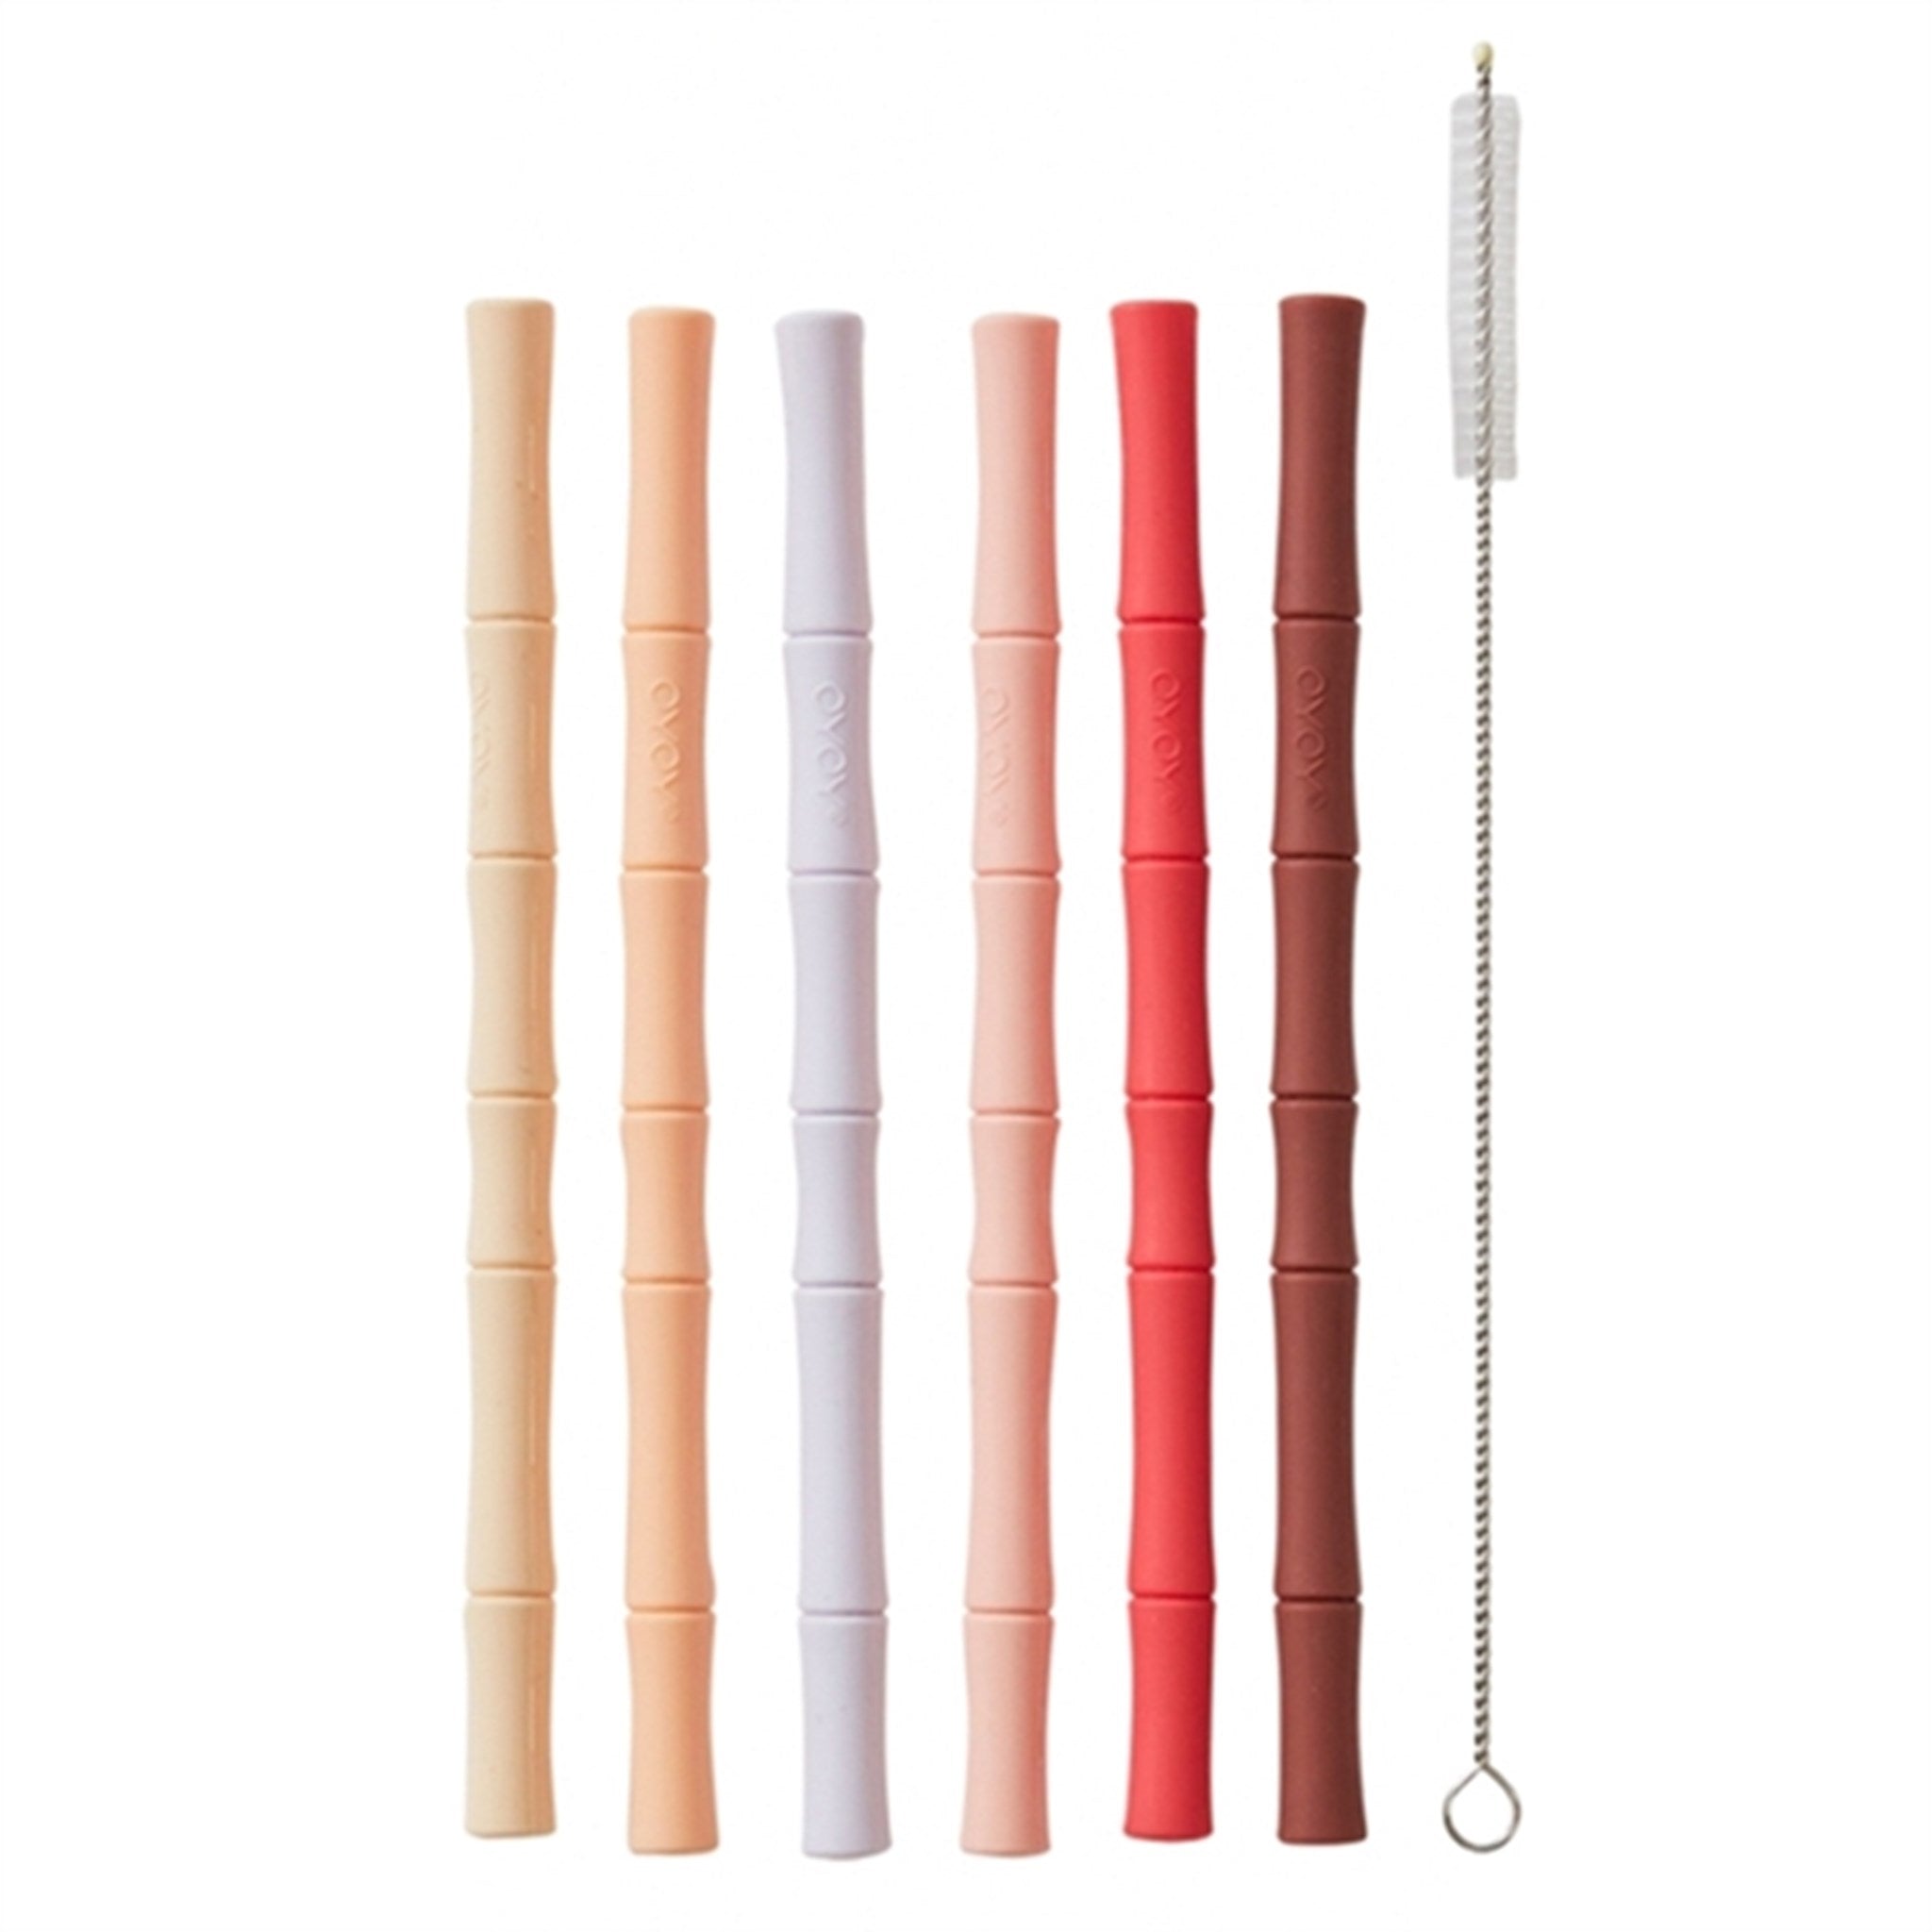 OYOY Bamboo Silicone Straw 6-Pack Cherry Red / Vanilla